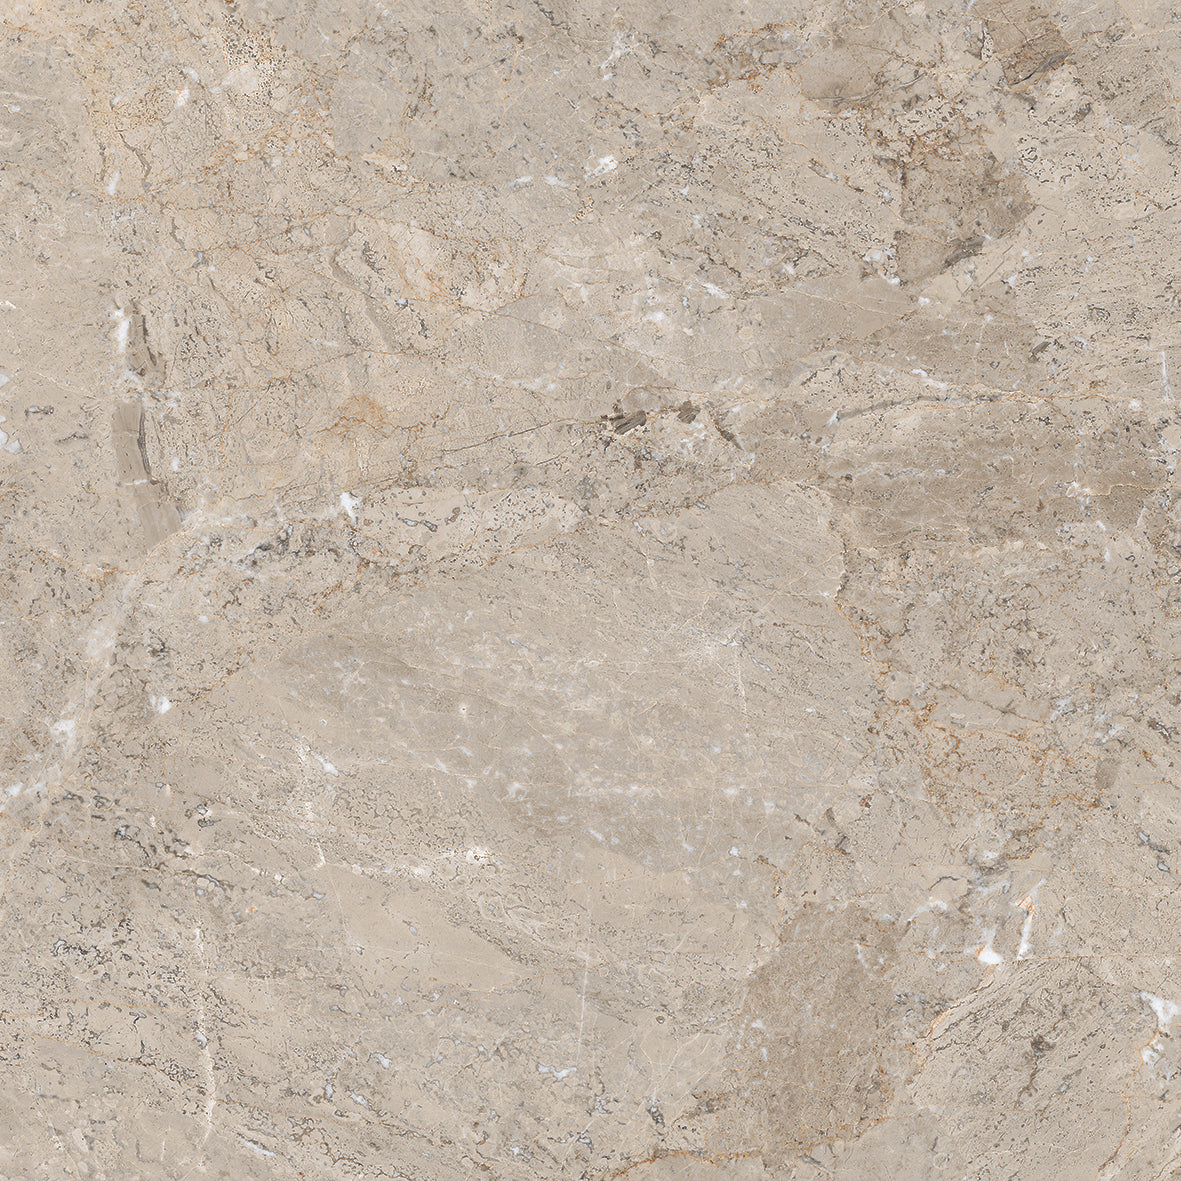 Sogno Grey gloss Porcelain 60x60cm Kitchen Bathroom Wall And Floor Tile